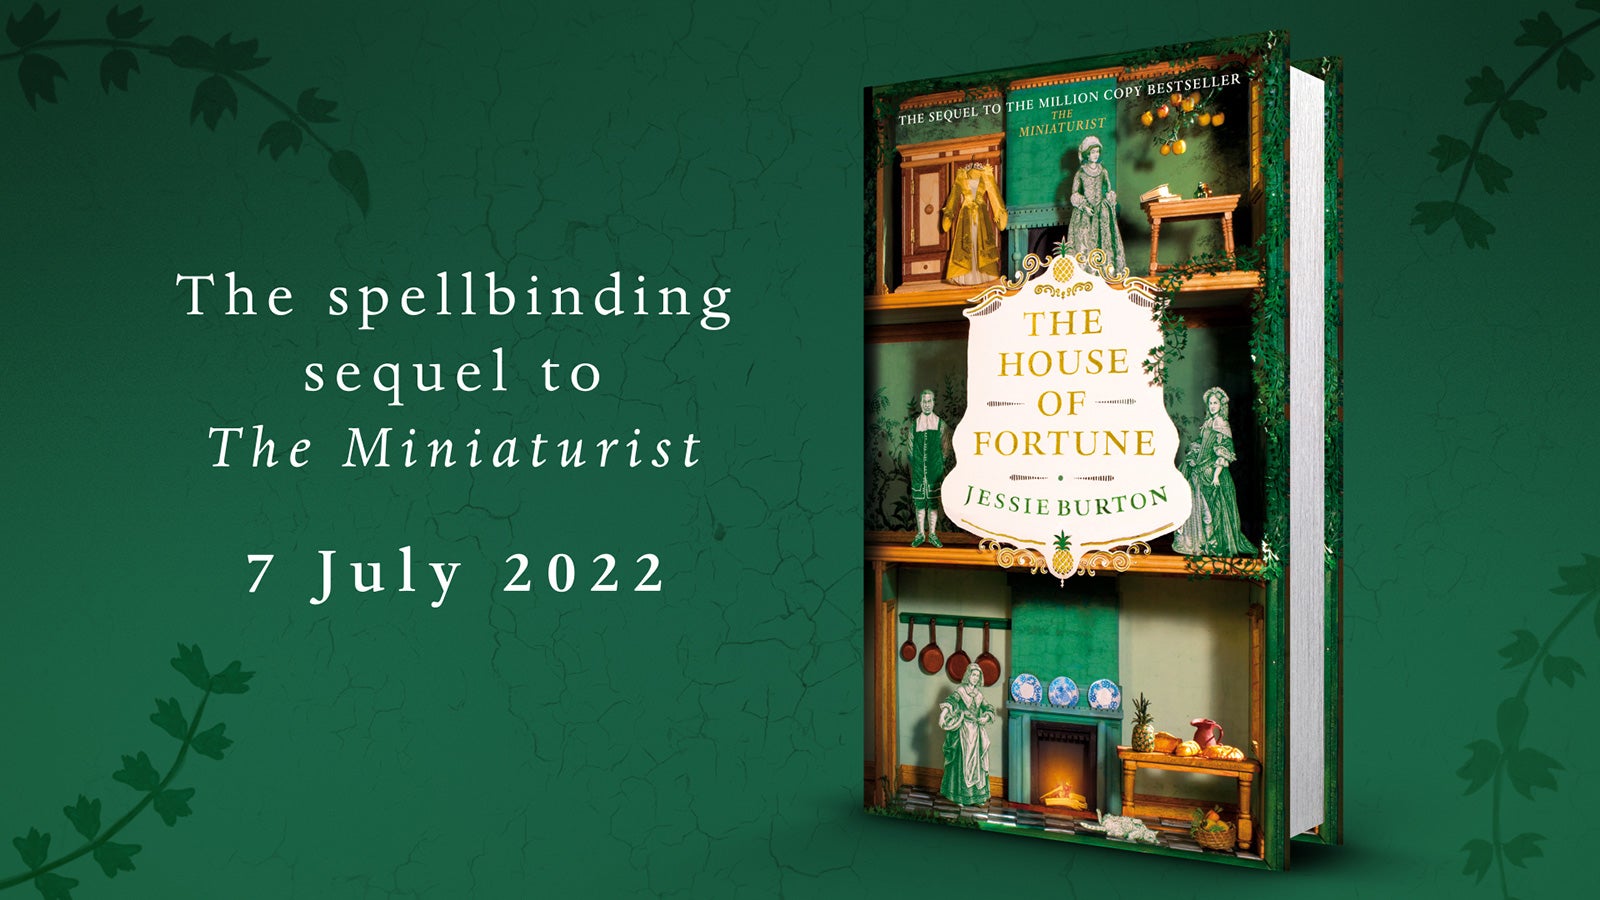 The House of Fortune by Jessie Burton on a green background, alongside the text 'The spellbinding sequel to The Miniaturist 7 July 2022'